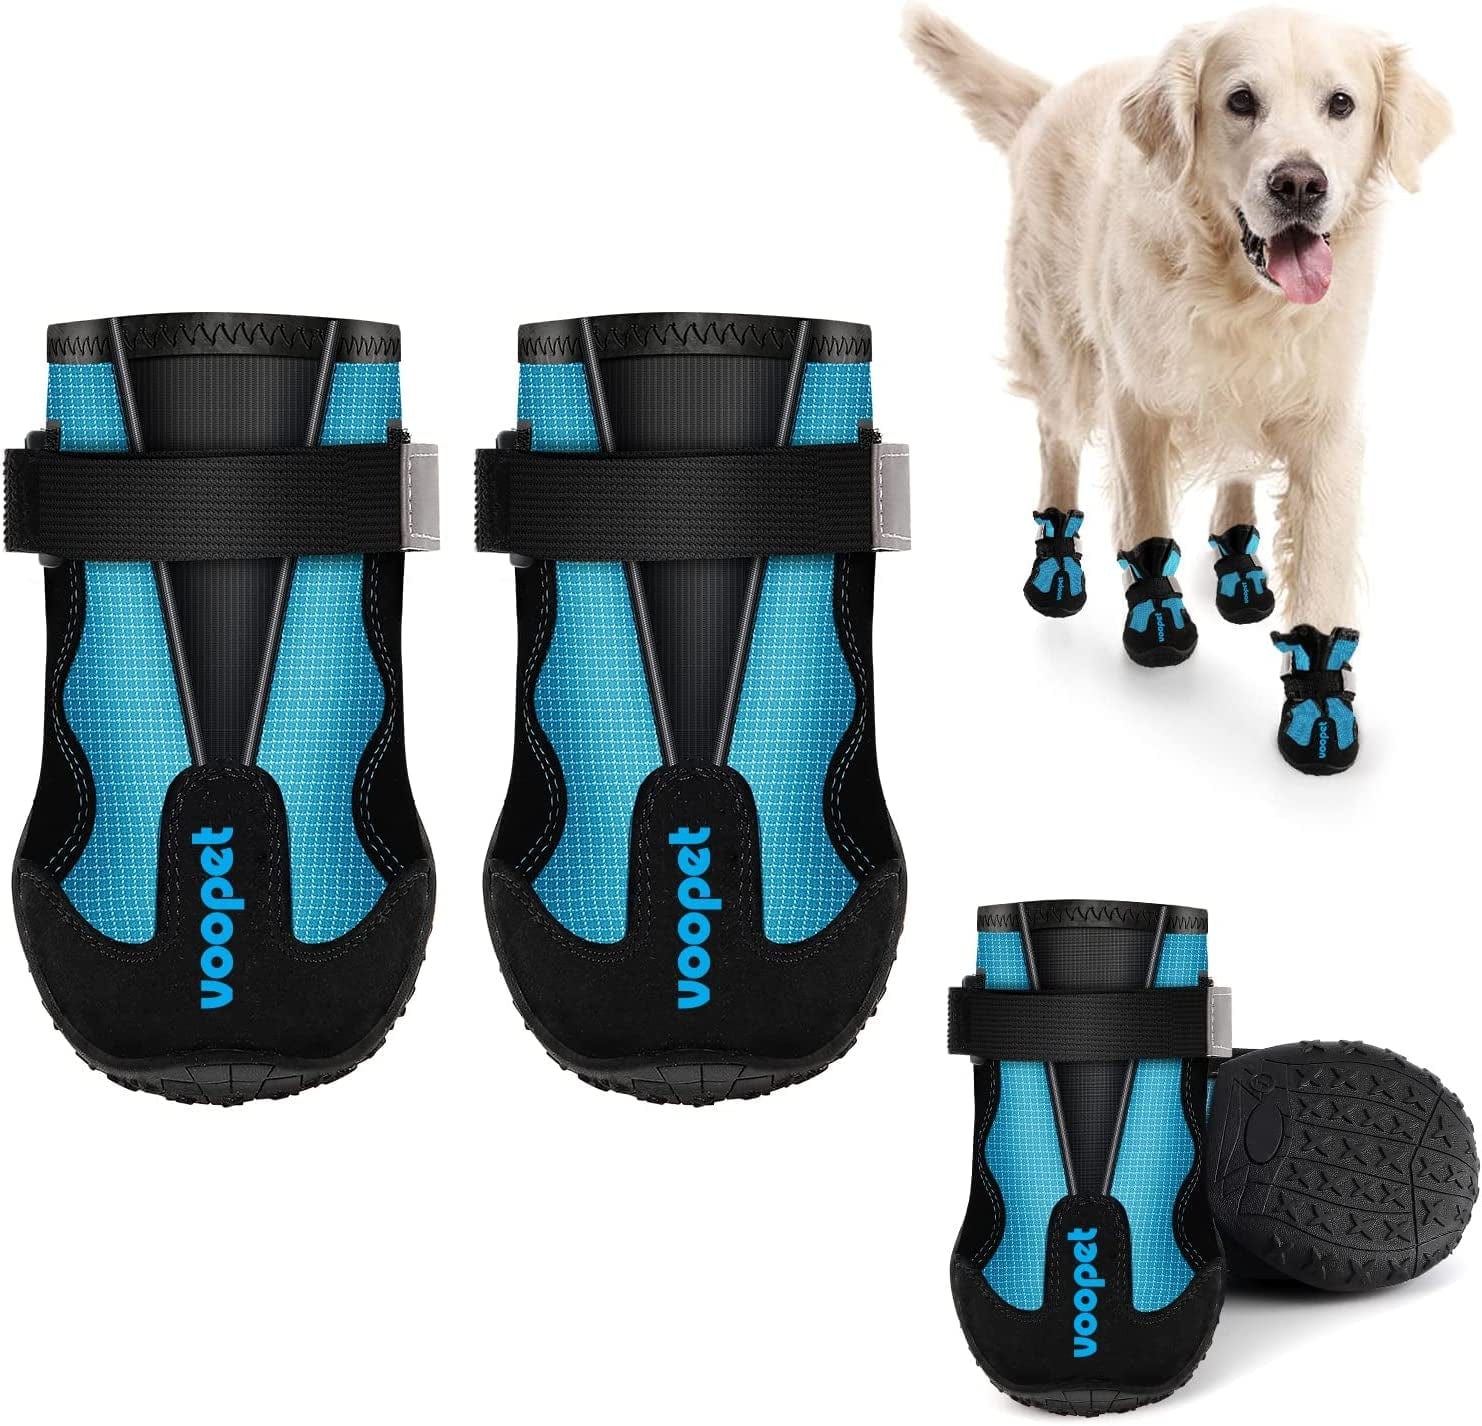 https://kol.pet/cdn/shop/products/voopet-dog-booties-for-hot-pavement-dog-shoes-paw-protectors-waterproof-dog-hiking-boots-avoid-injury-with-reflective-nylon-elastic-straps-stay-on-well-non-slip-outsole-safety-for-sno_d8ba0ef1-c4c4-4a63-938f-912c985324b2_1482x.jpg?v=1675480336